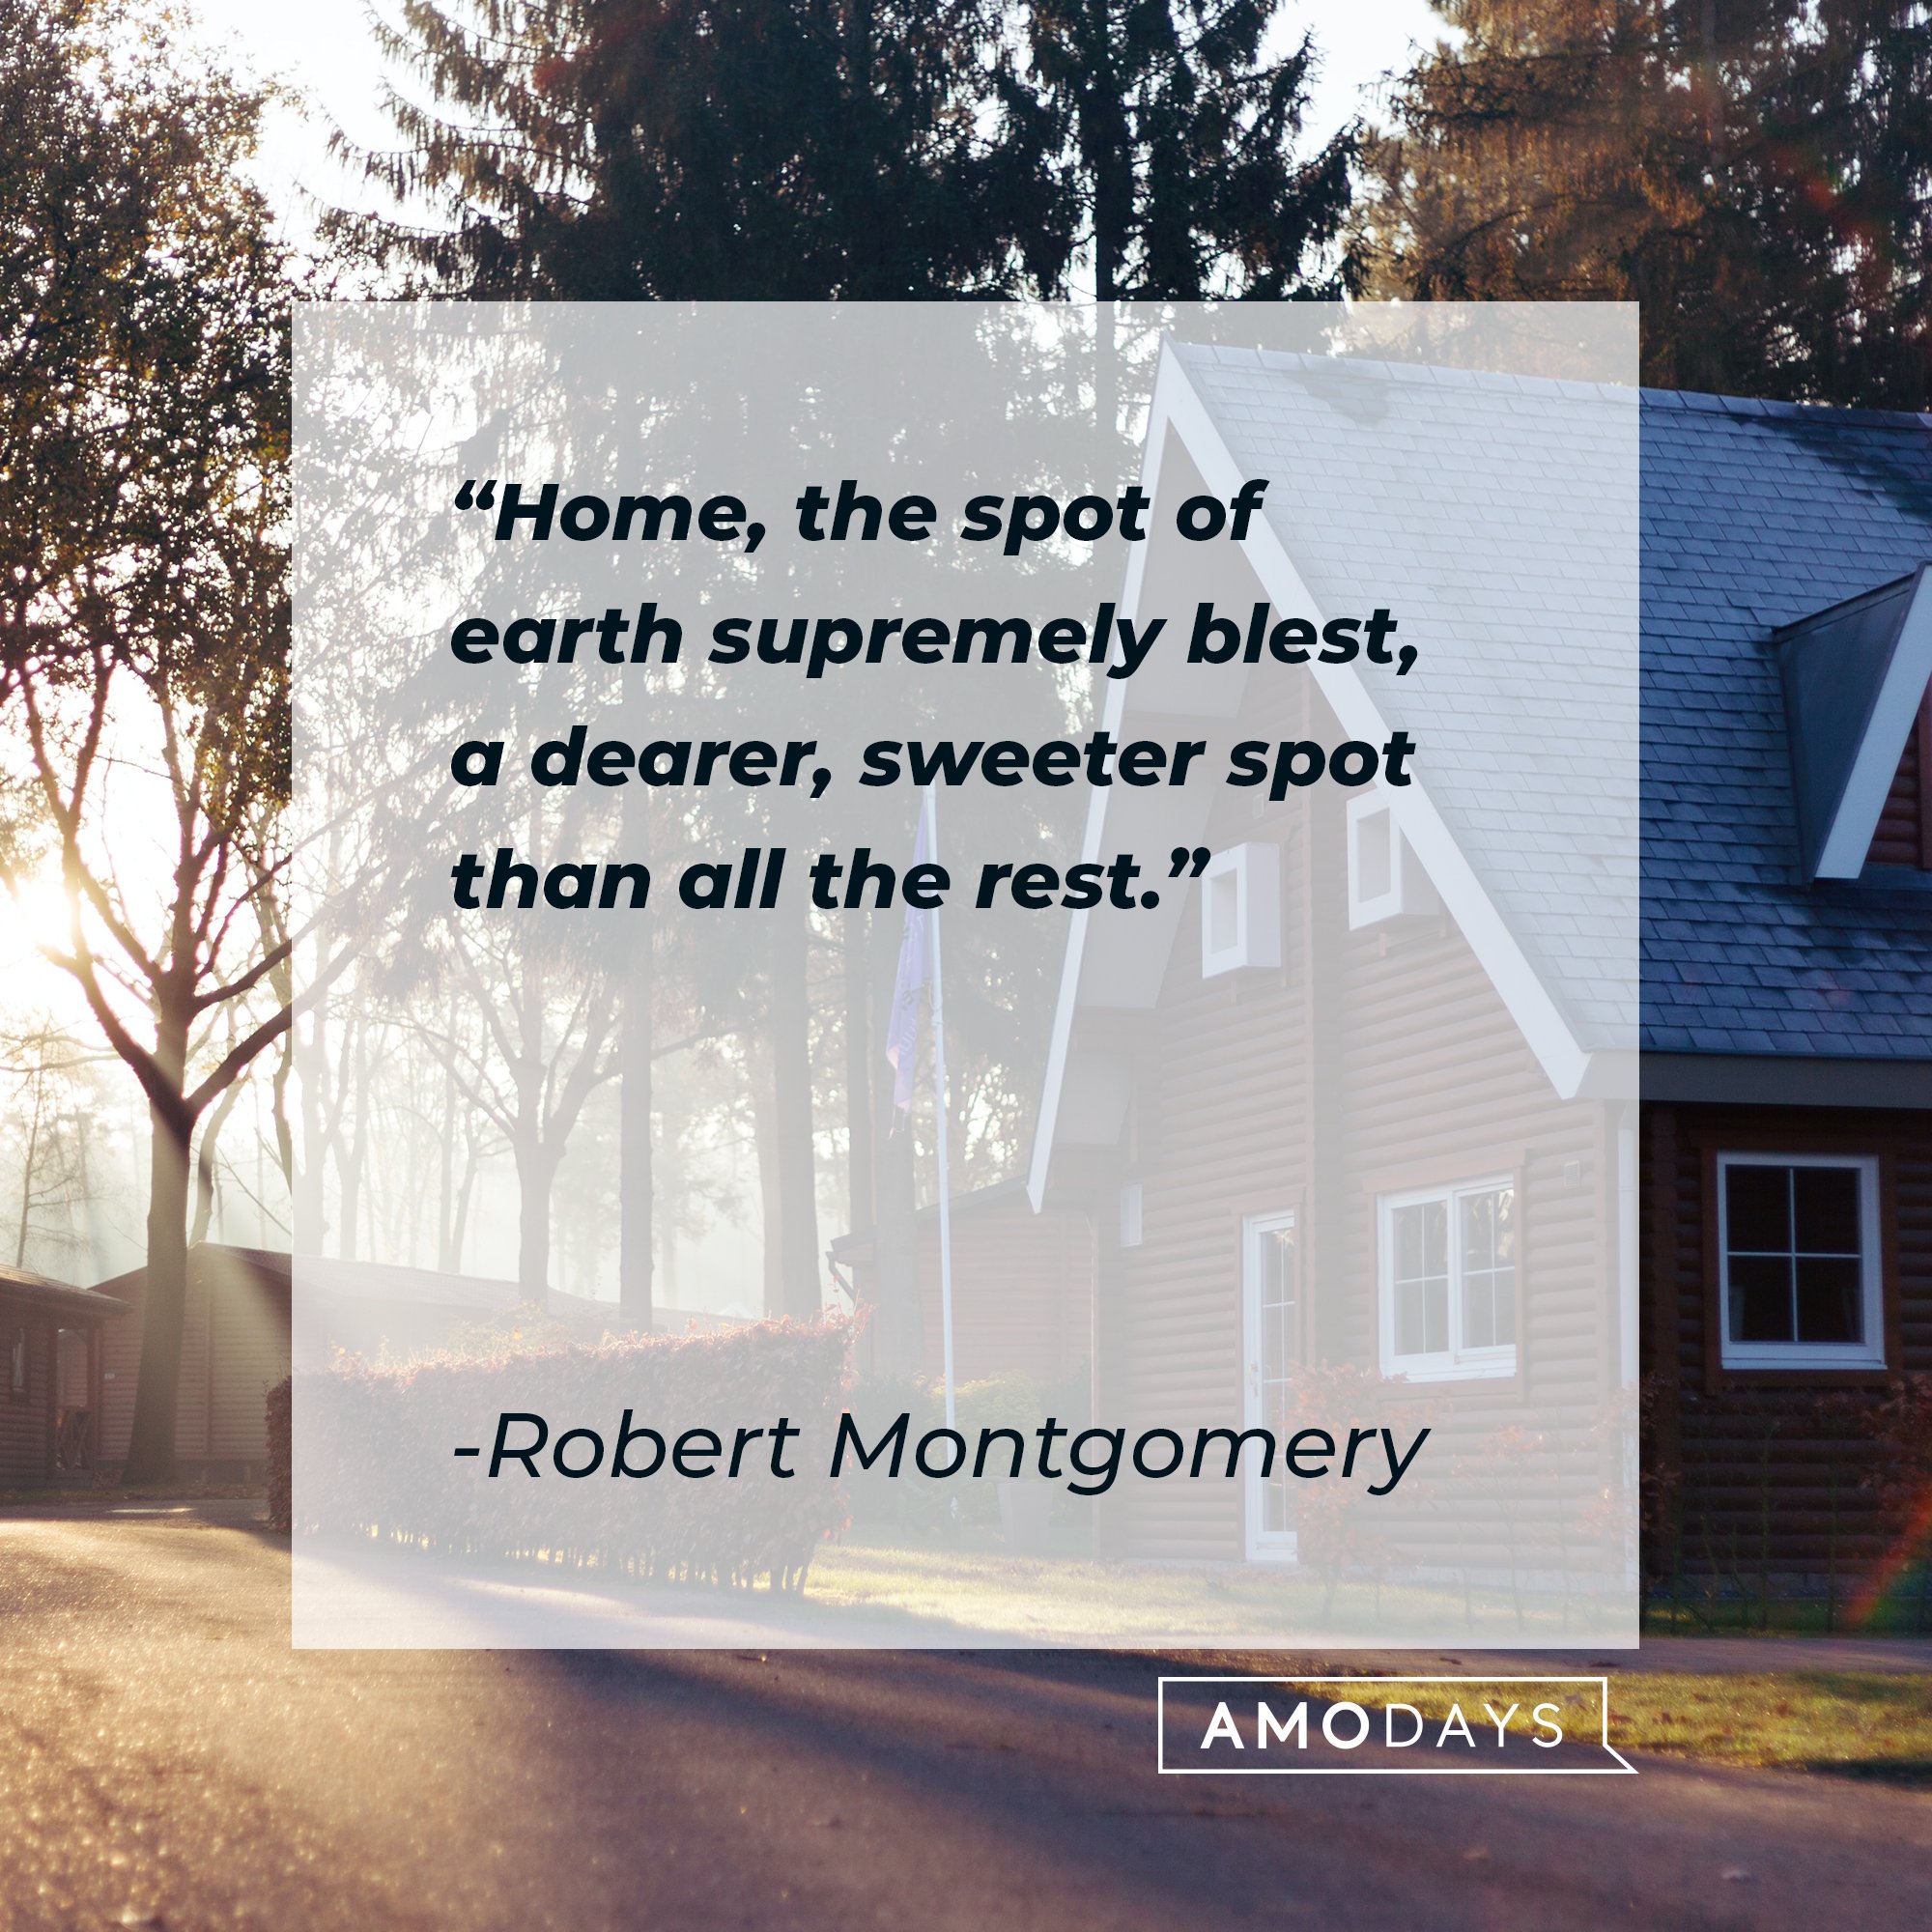 Robert Montgomery's quote: "Home, the spot of earth supremely blest, a dearer, sweeter spot than all the rest." | Image: AmoDays